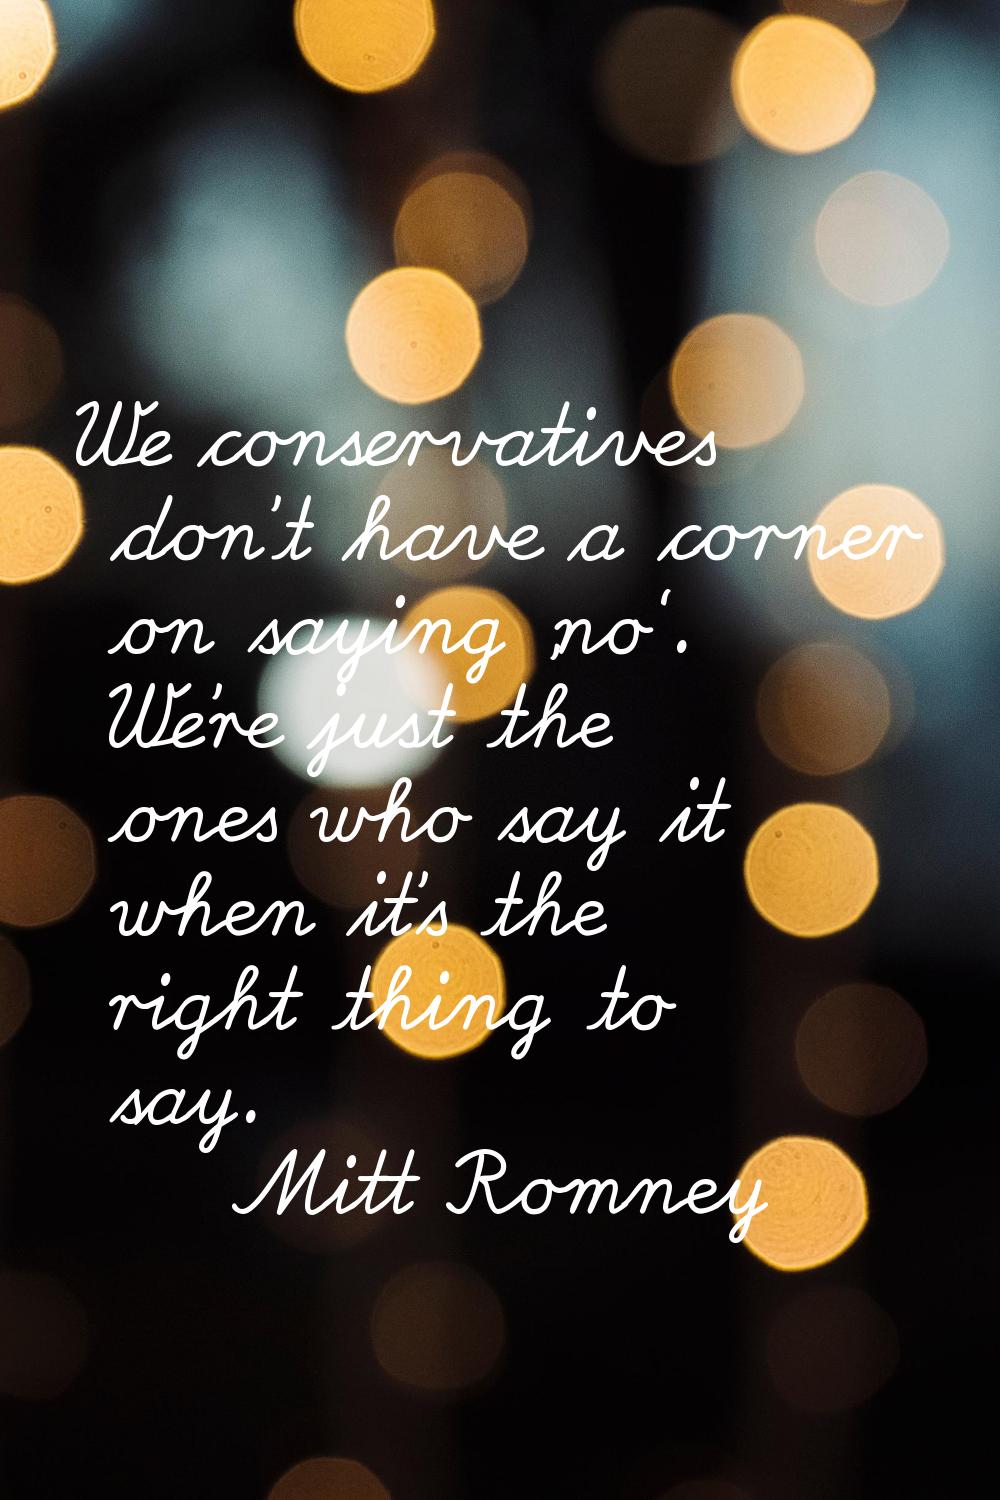 We conservatives don't have a corner on saying 'no'. We're just the ones who say it when it's the r